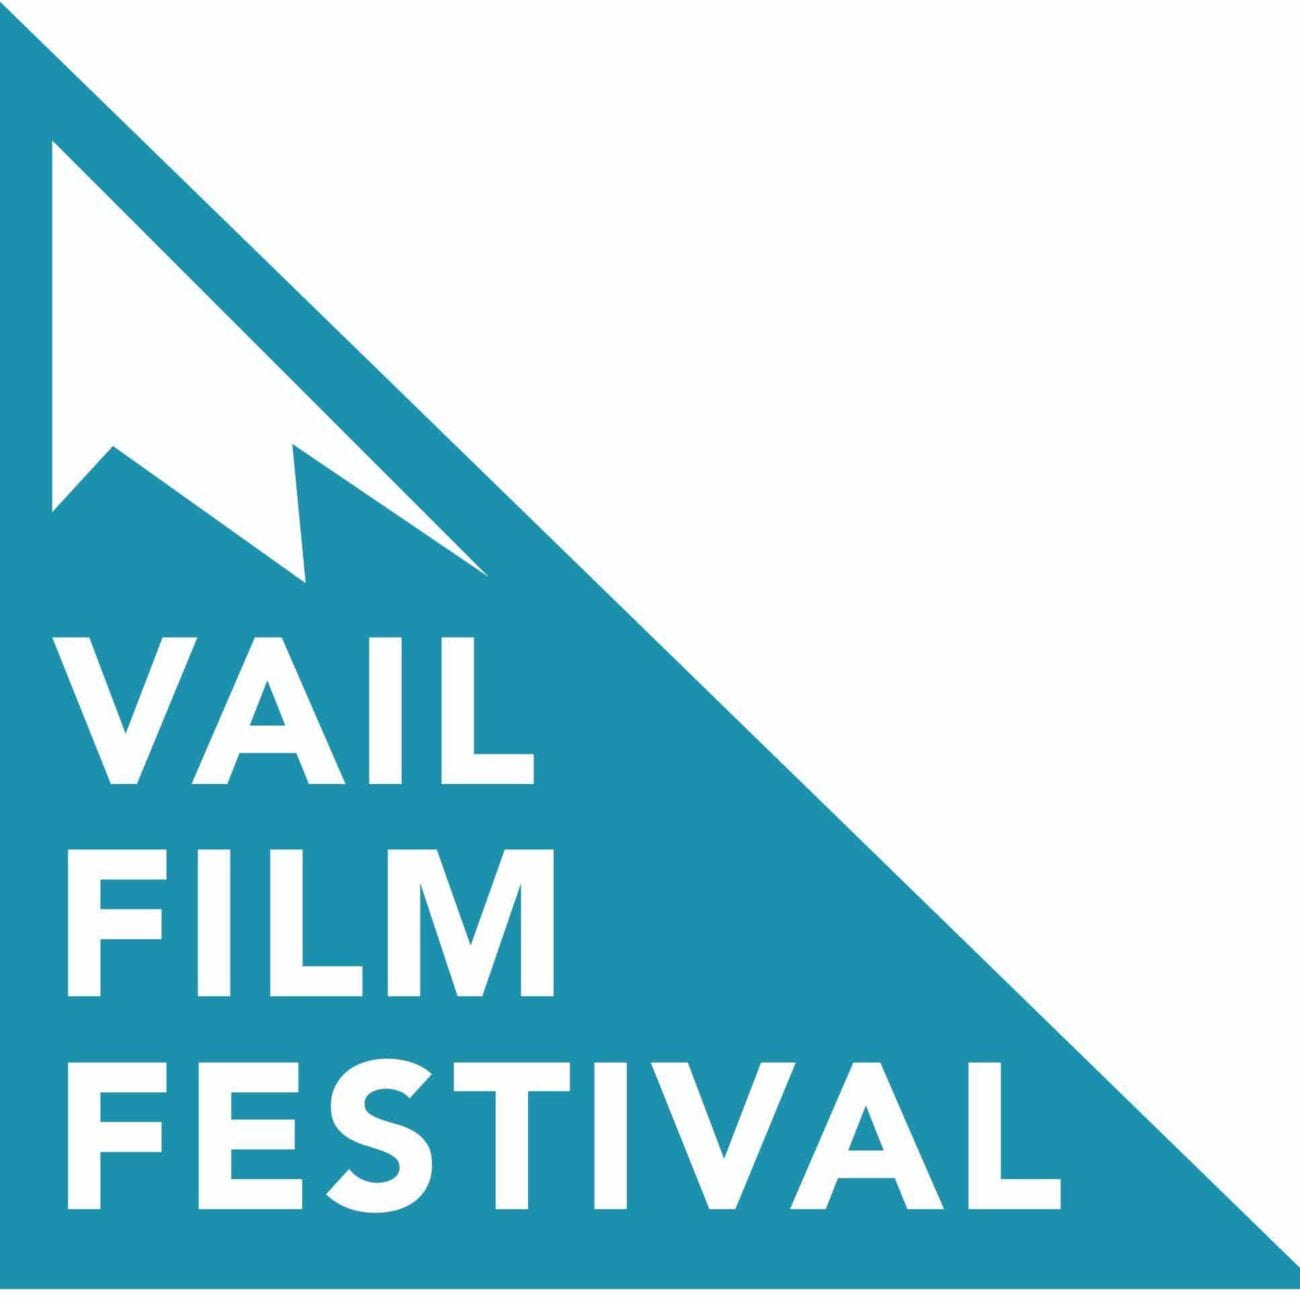 Vail Film Festival is happening online soon, all the reasons to tune in